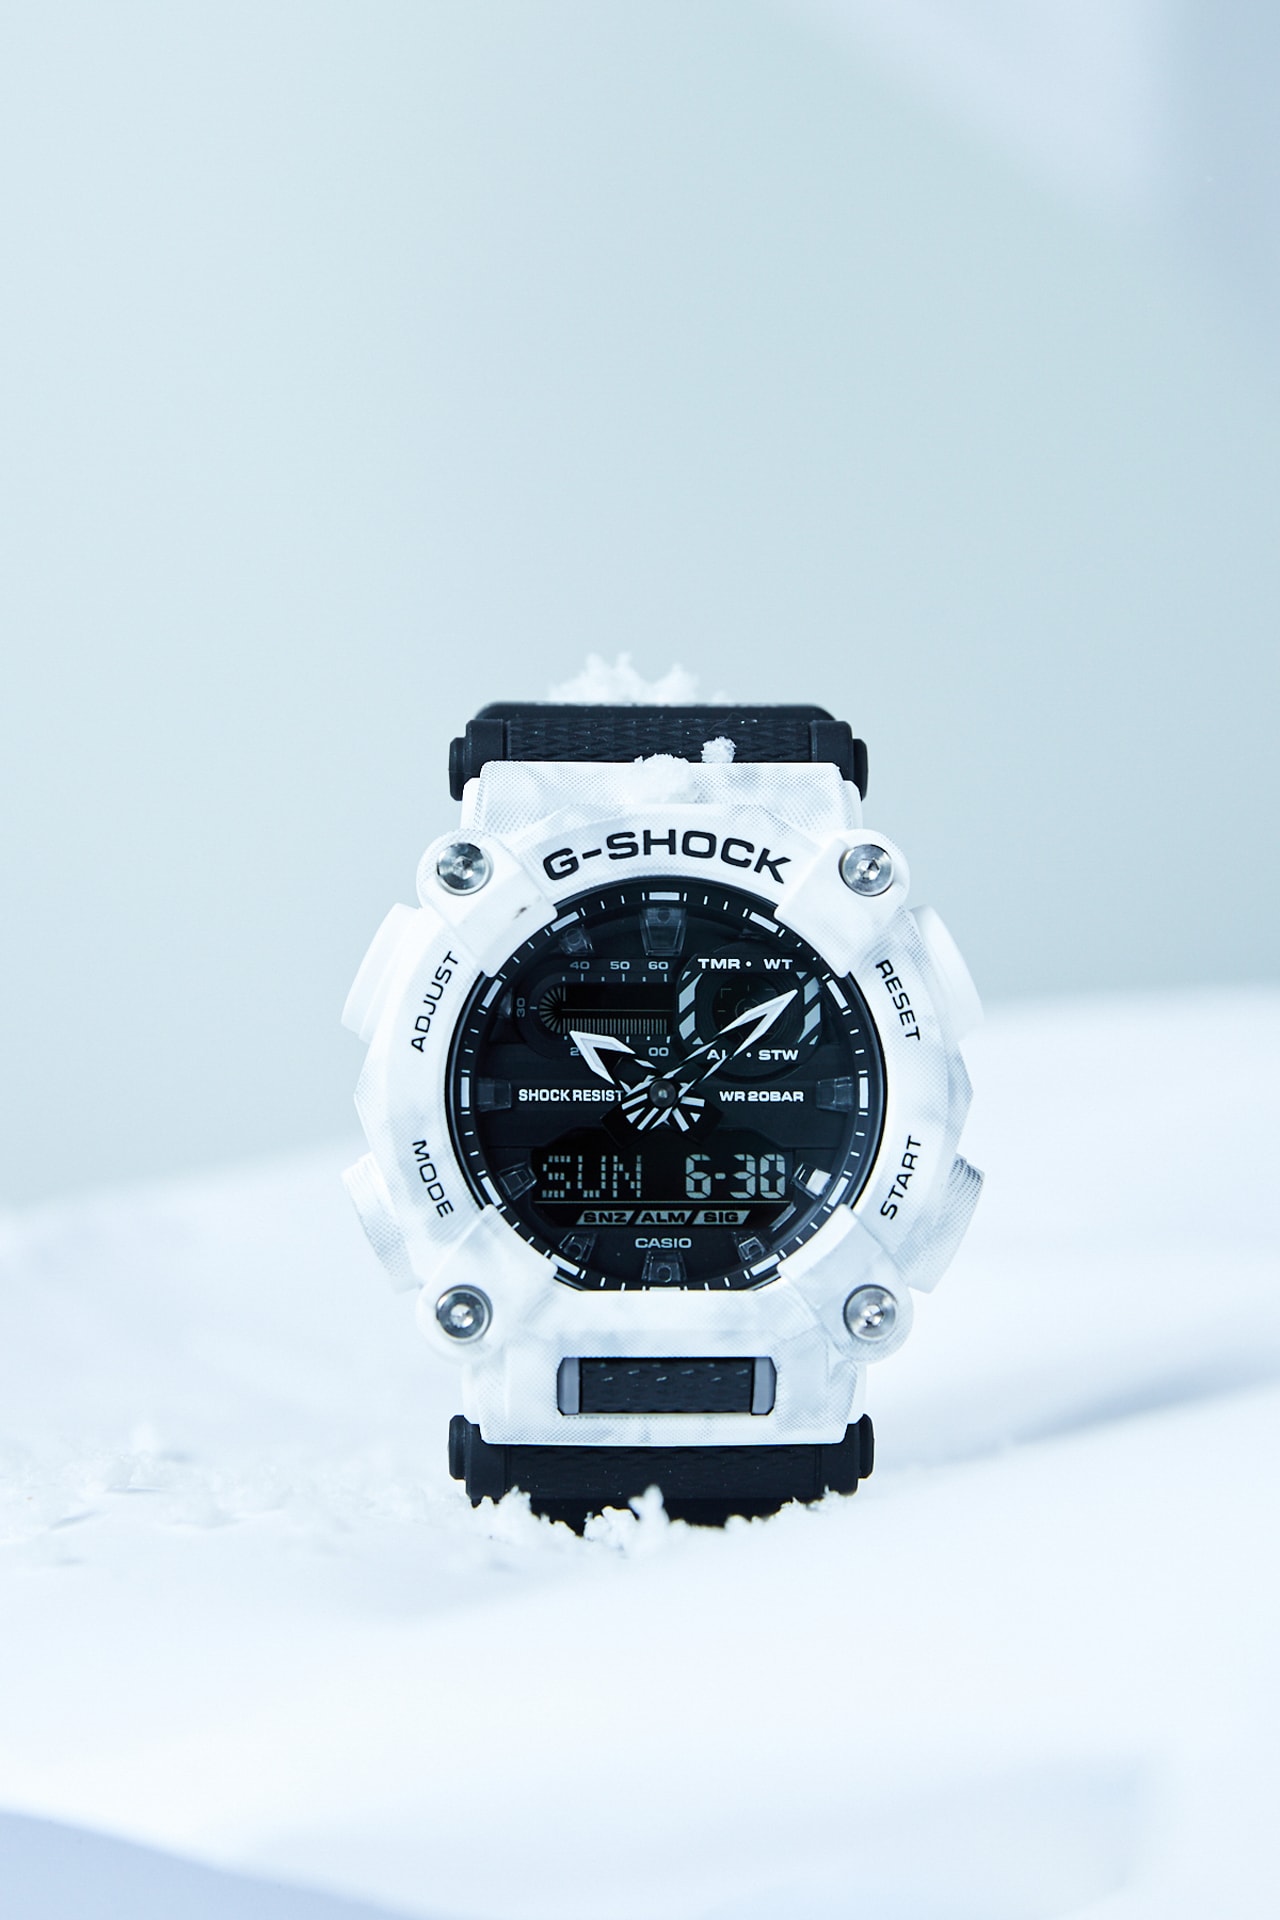 Gショックが新たなカモフラージュシリーズを発売 G-shock four new models octagonal GAE-2100, the square case DW-5600, the sporty analog-digital combination GA-2200 and the rugged and powerful Ga-900 snow camouflage design DW5600GC-7 GA2200GC-7A  GA900GC-7A GAE2100GC-7A winter wear outwear sportswear all-white base styles